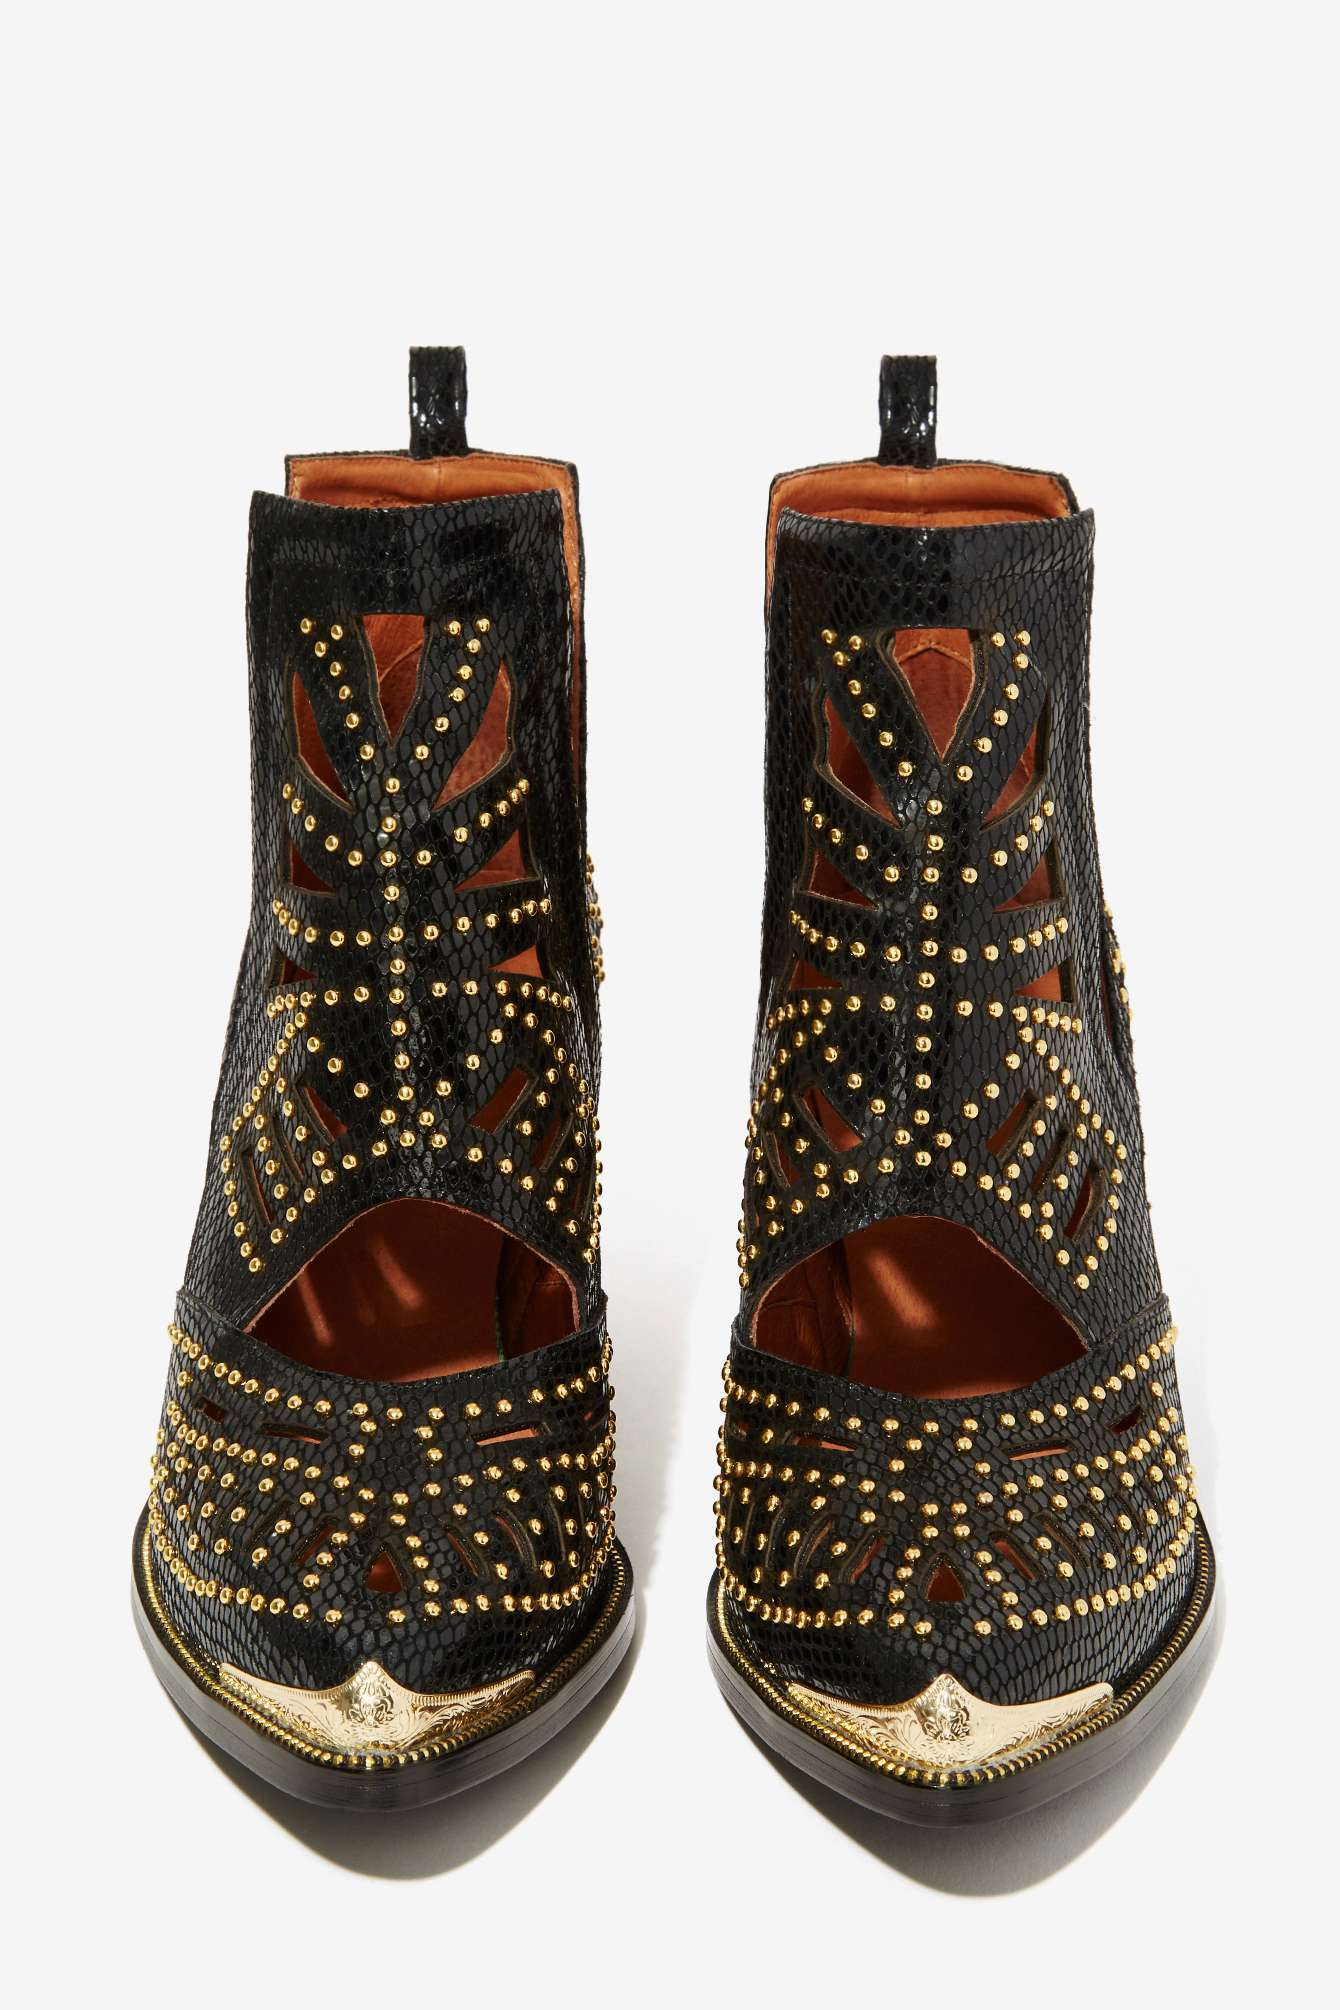 shopping shops Jeffrey Campbell Maceo Cutout Leather Boot in Black Lyst  discounts sellers -www.ashqargroup.com